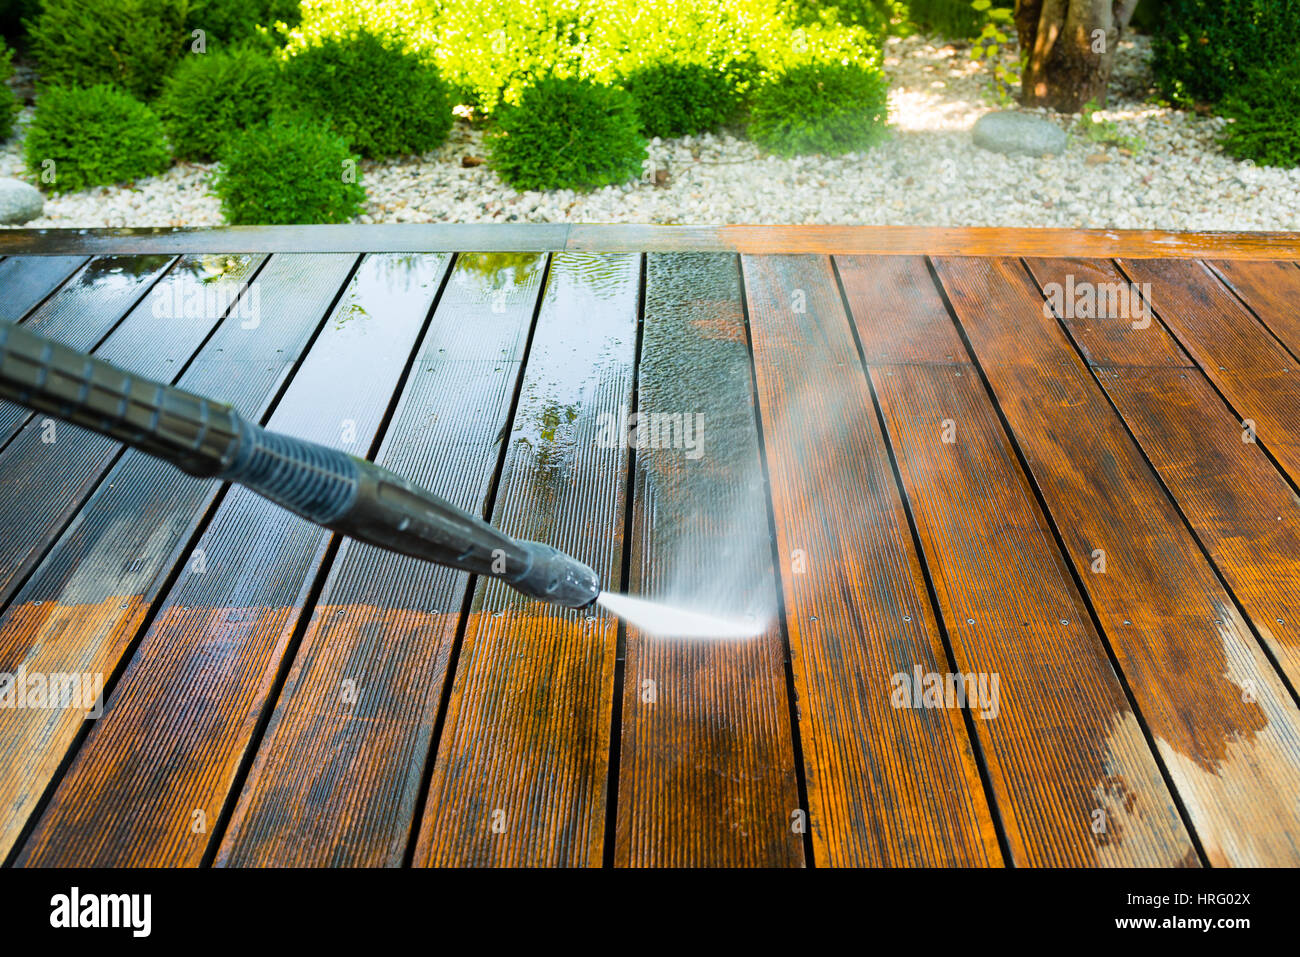 cleaning terrace with a power washer - high water pressure cleaner on wooden terrace surface Stock Photo